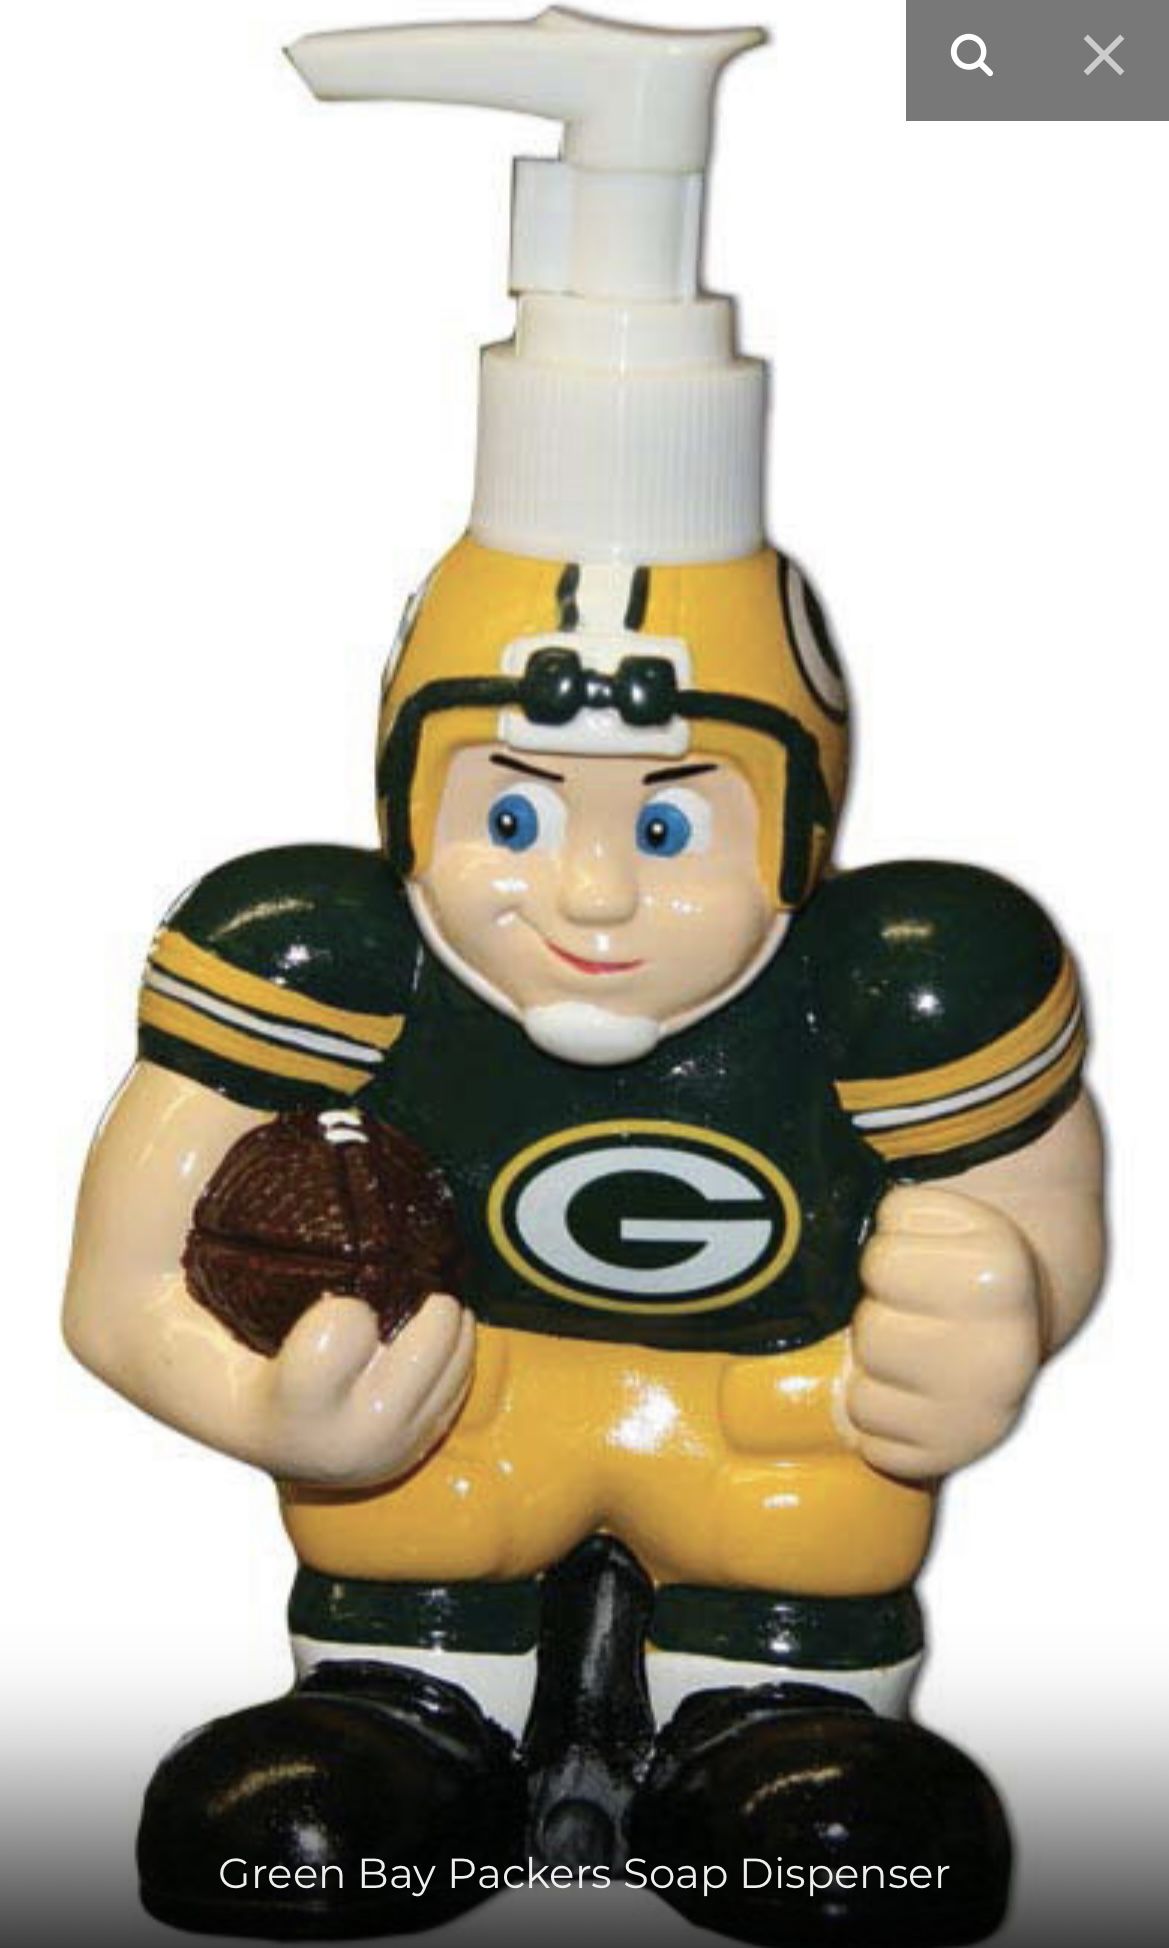 Green Bay Packers NFL Vintage Football Player Soap Dispenser! Quantity of 2! Like NEW!